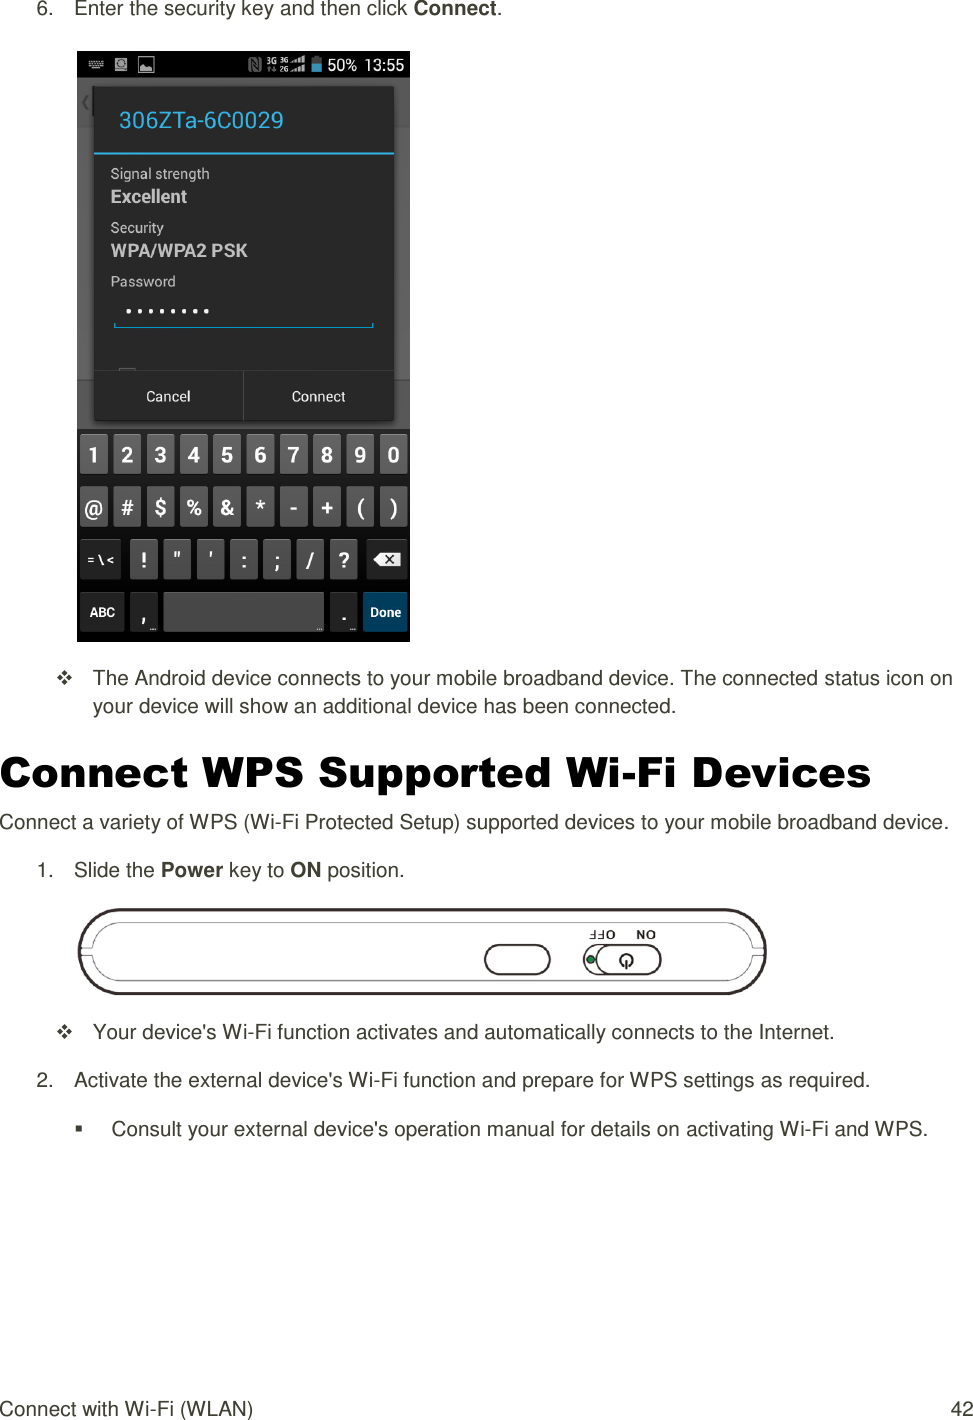 Connect with Wi-Fi (WLAN)  42 6.  Enter the security key and then click Connect.     The Android device connects to your mobile broadband device. The connected status icon on your device will show an additional device has been connected. Connect WPS Supported Wi-Fi Devices Connect a variety of WPS (Wi-Fi Protected Setup) supported devices to your mobile broadband device. 1.  Slide the Power key to ON position.    Your device&apos;s Wi-Fi function activates and automatically connects to the Internet. 2.  Activate the external device&apos;s Wi-Fi function and prepare for WPS settings as required.   Consult your external device&apos;s operation manual for details on activating Wi-Fi and WPS. 